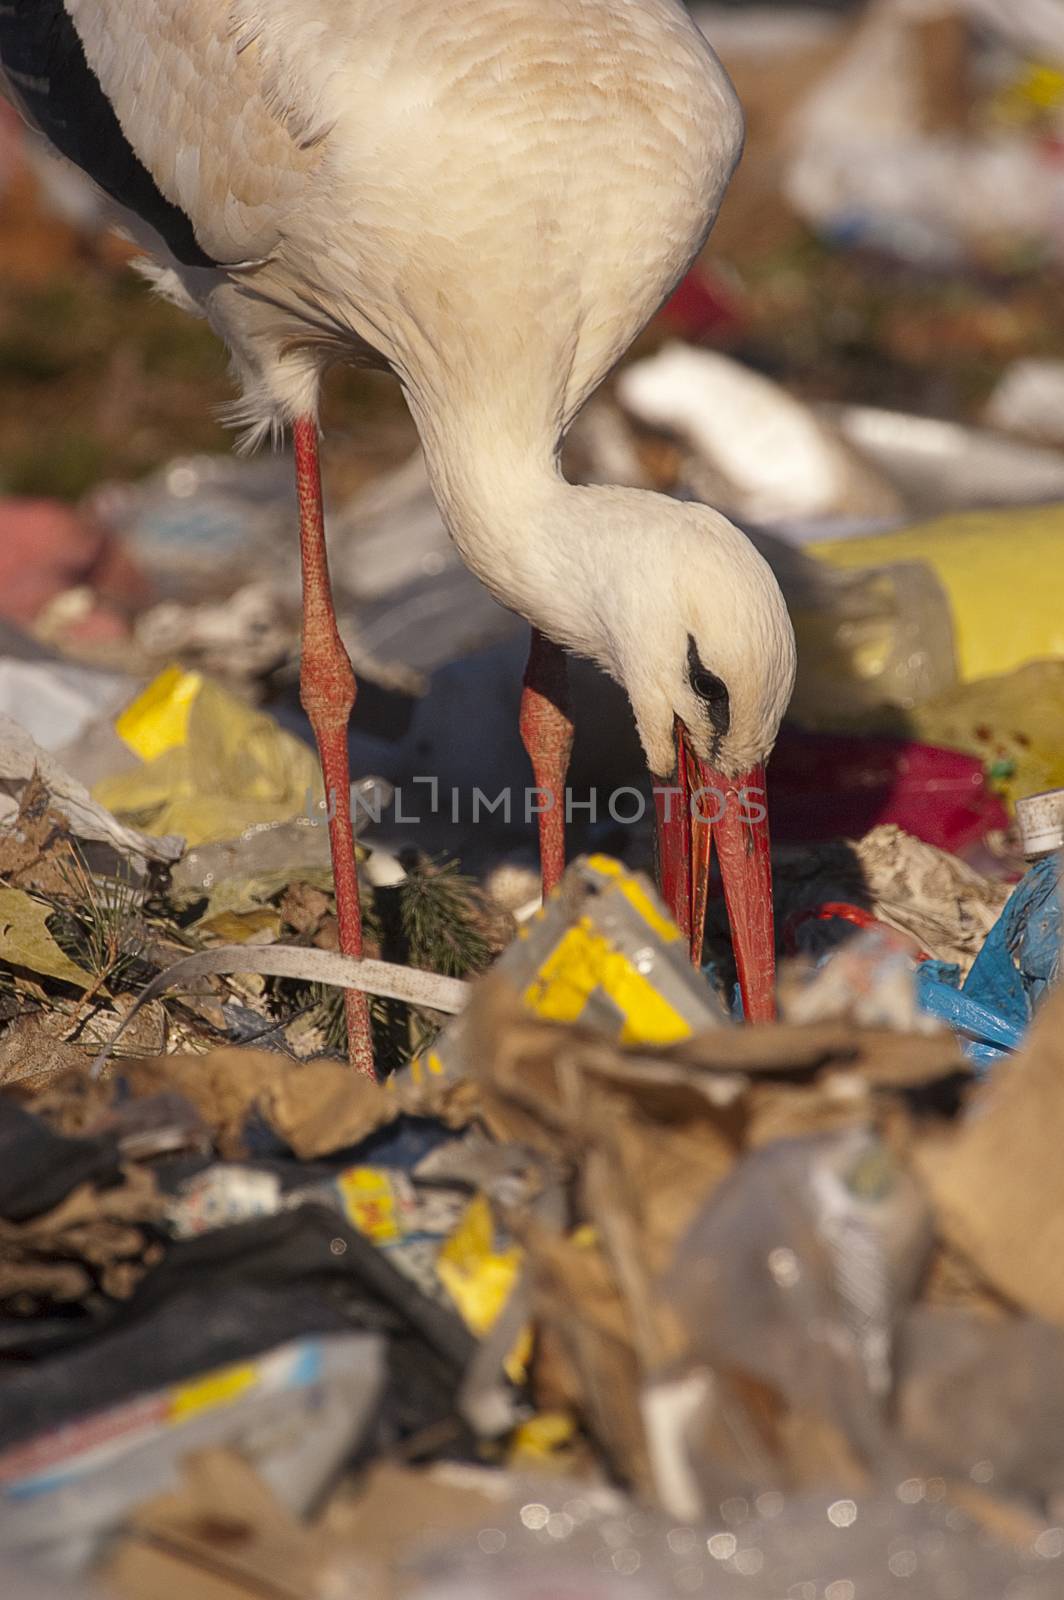 white stork looking for food in the garbage, Ciconia ciconia by jalonsohu@gmail.com